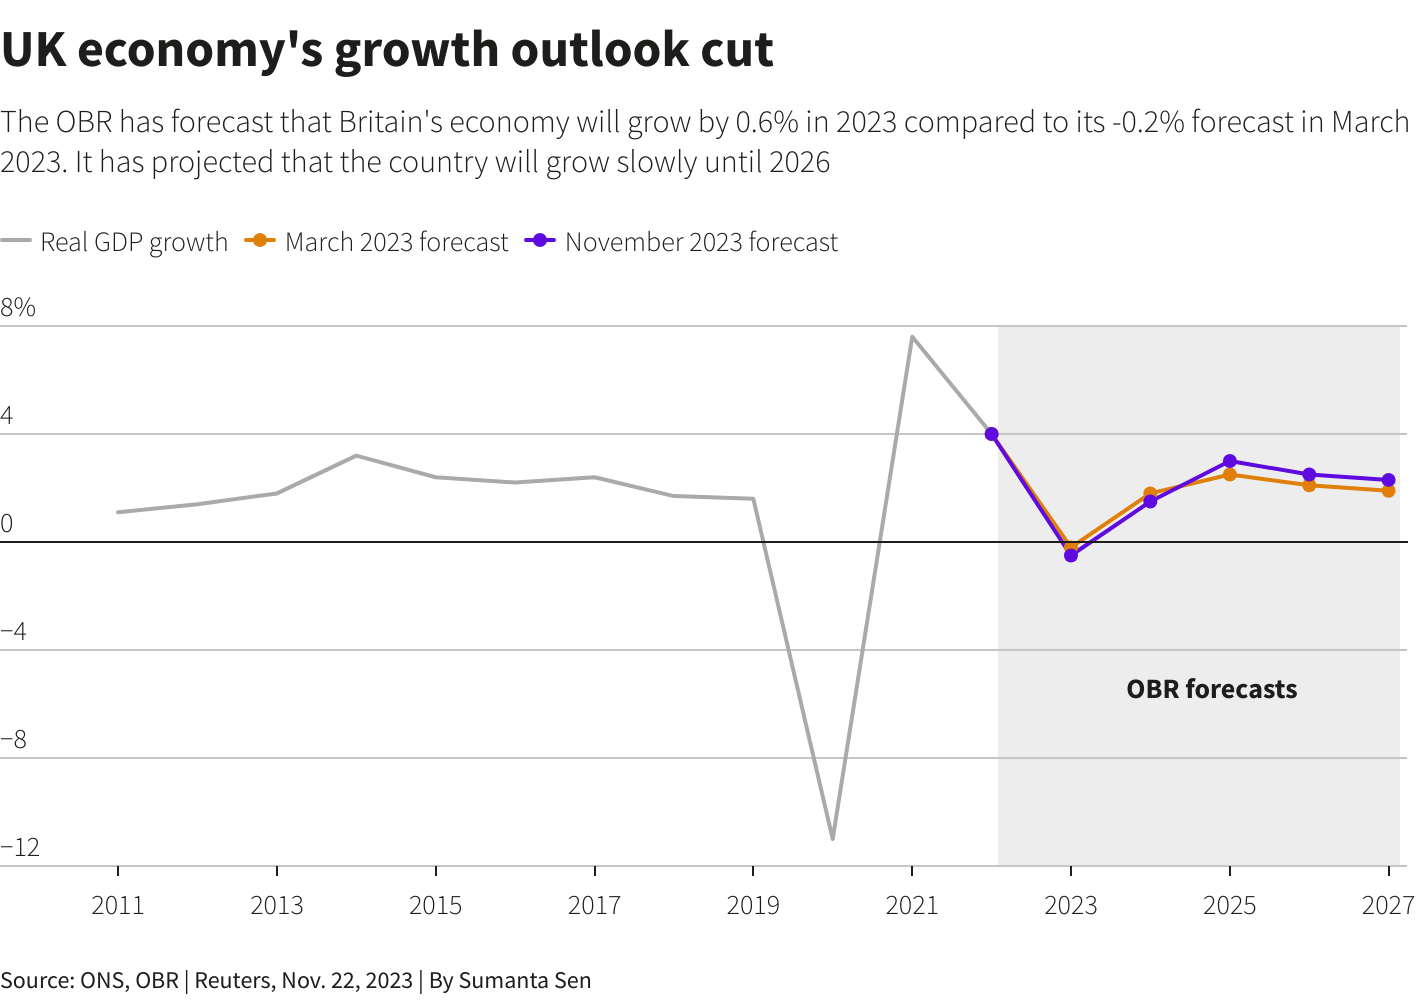 Line chart showing UK economy growth outlook by Reuters.